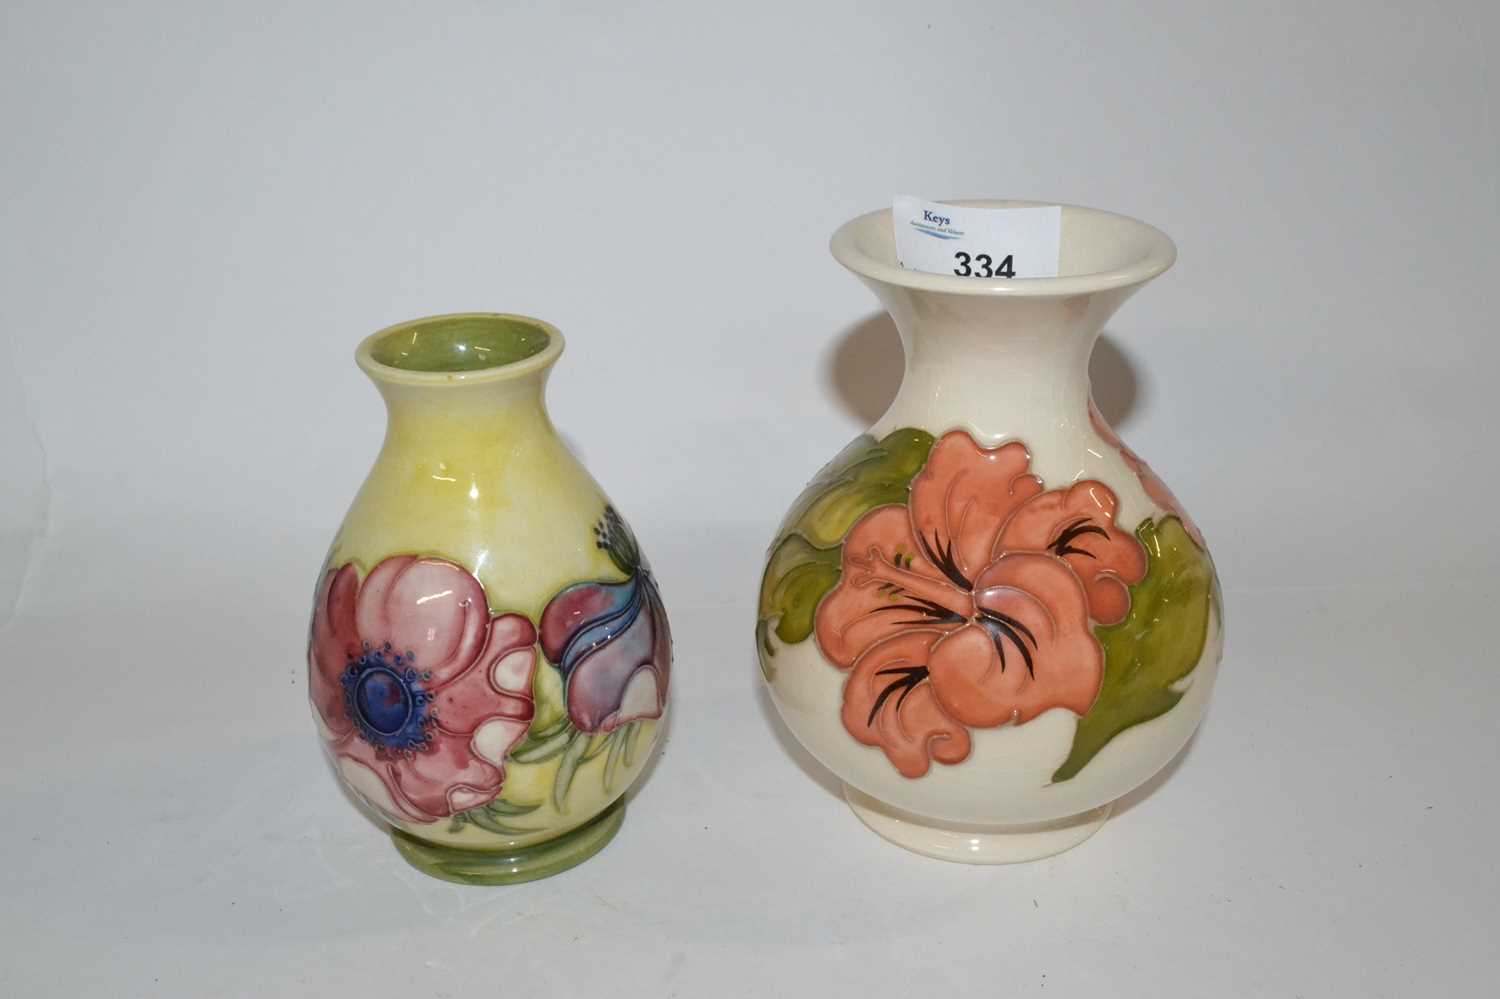 A Moorcroft vase of small baluster form, the yellow ground with tubelined anemone design with